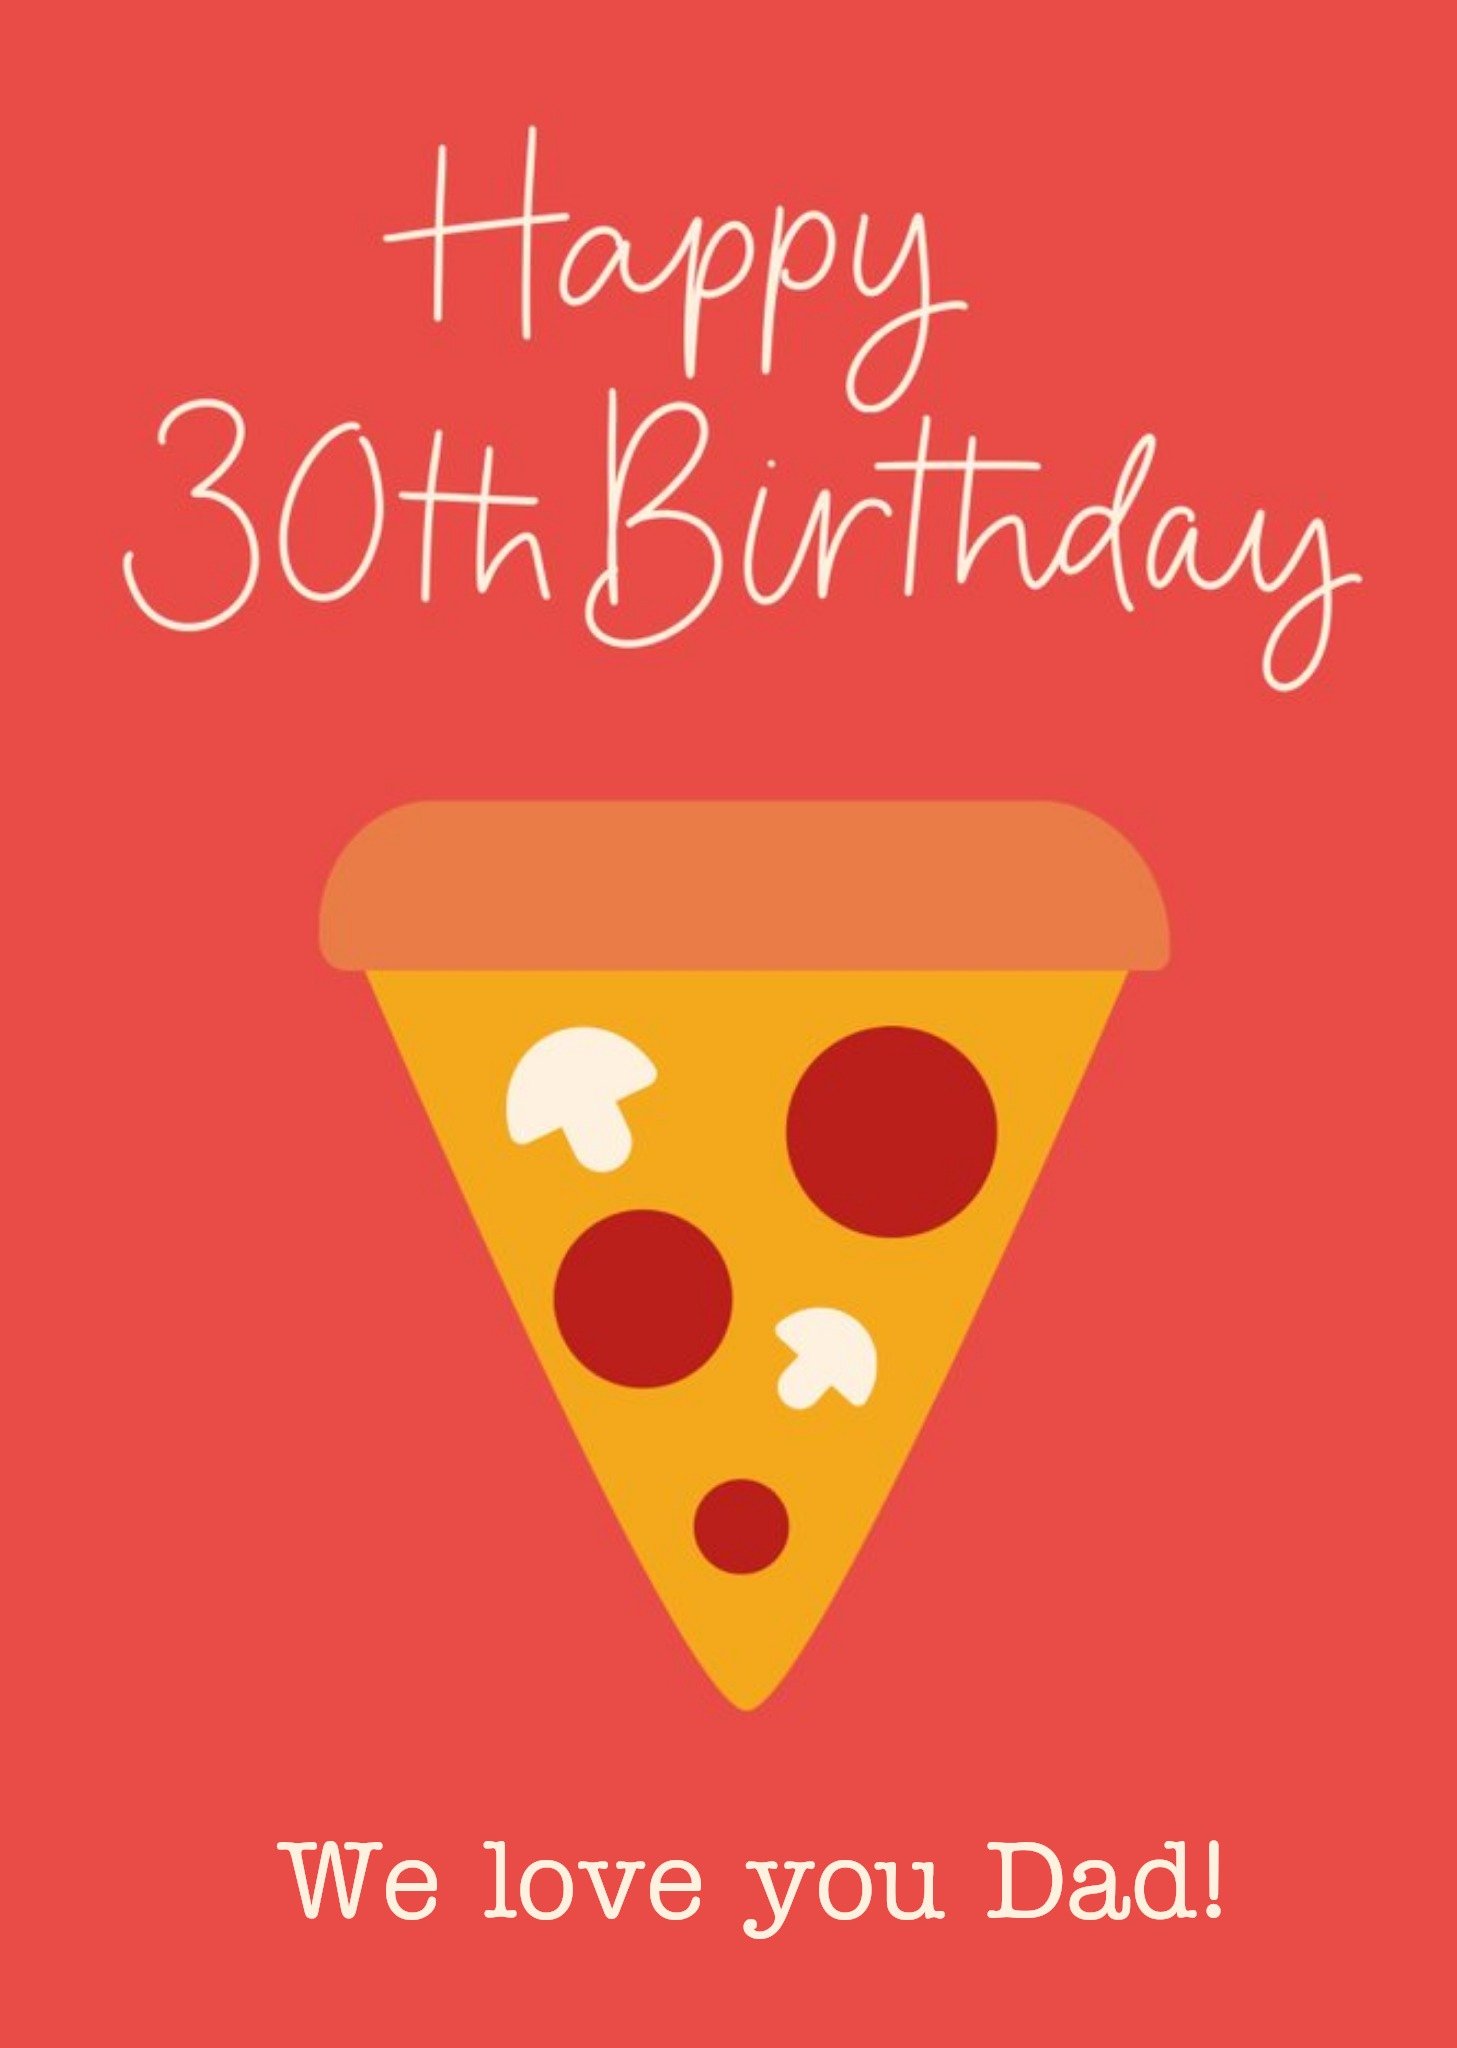 Moonpig Scatterbrain Bright Graphic Illustration Of A Pizza Slice. Happy 30th Birthday Dad Card Ecar